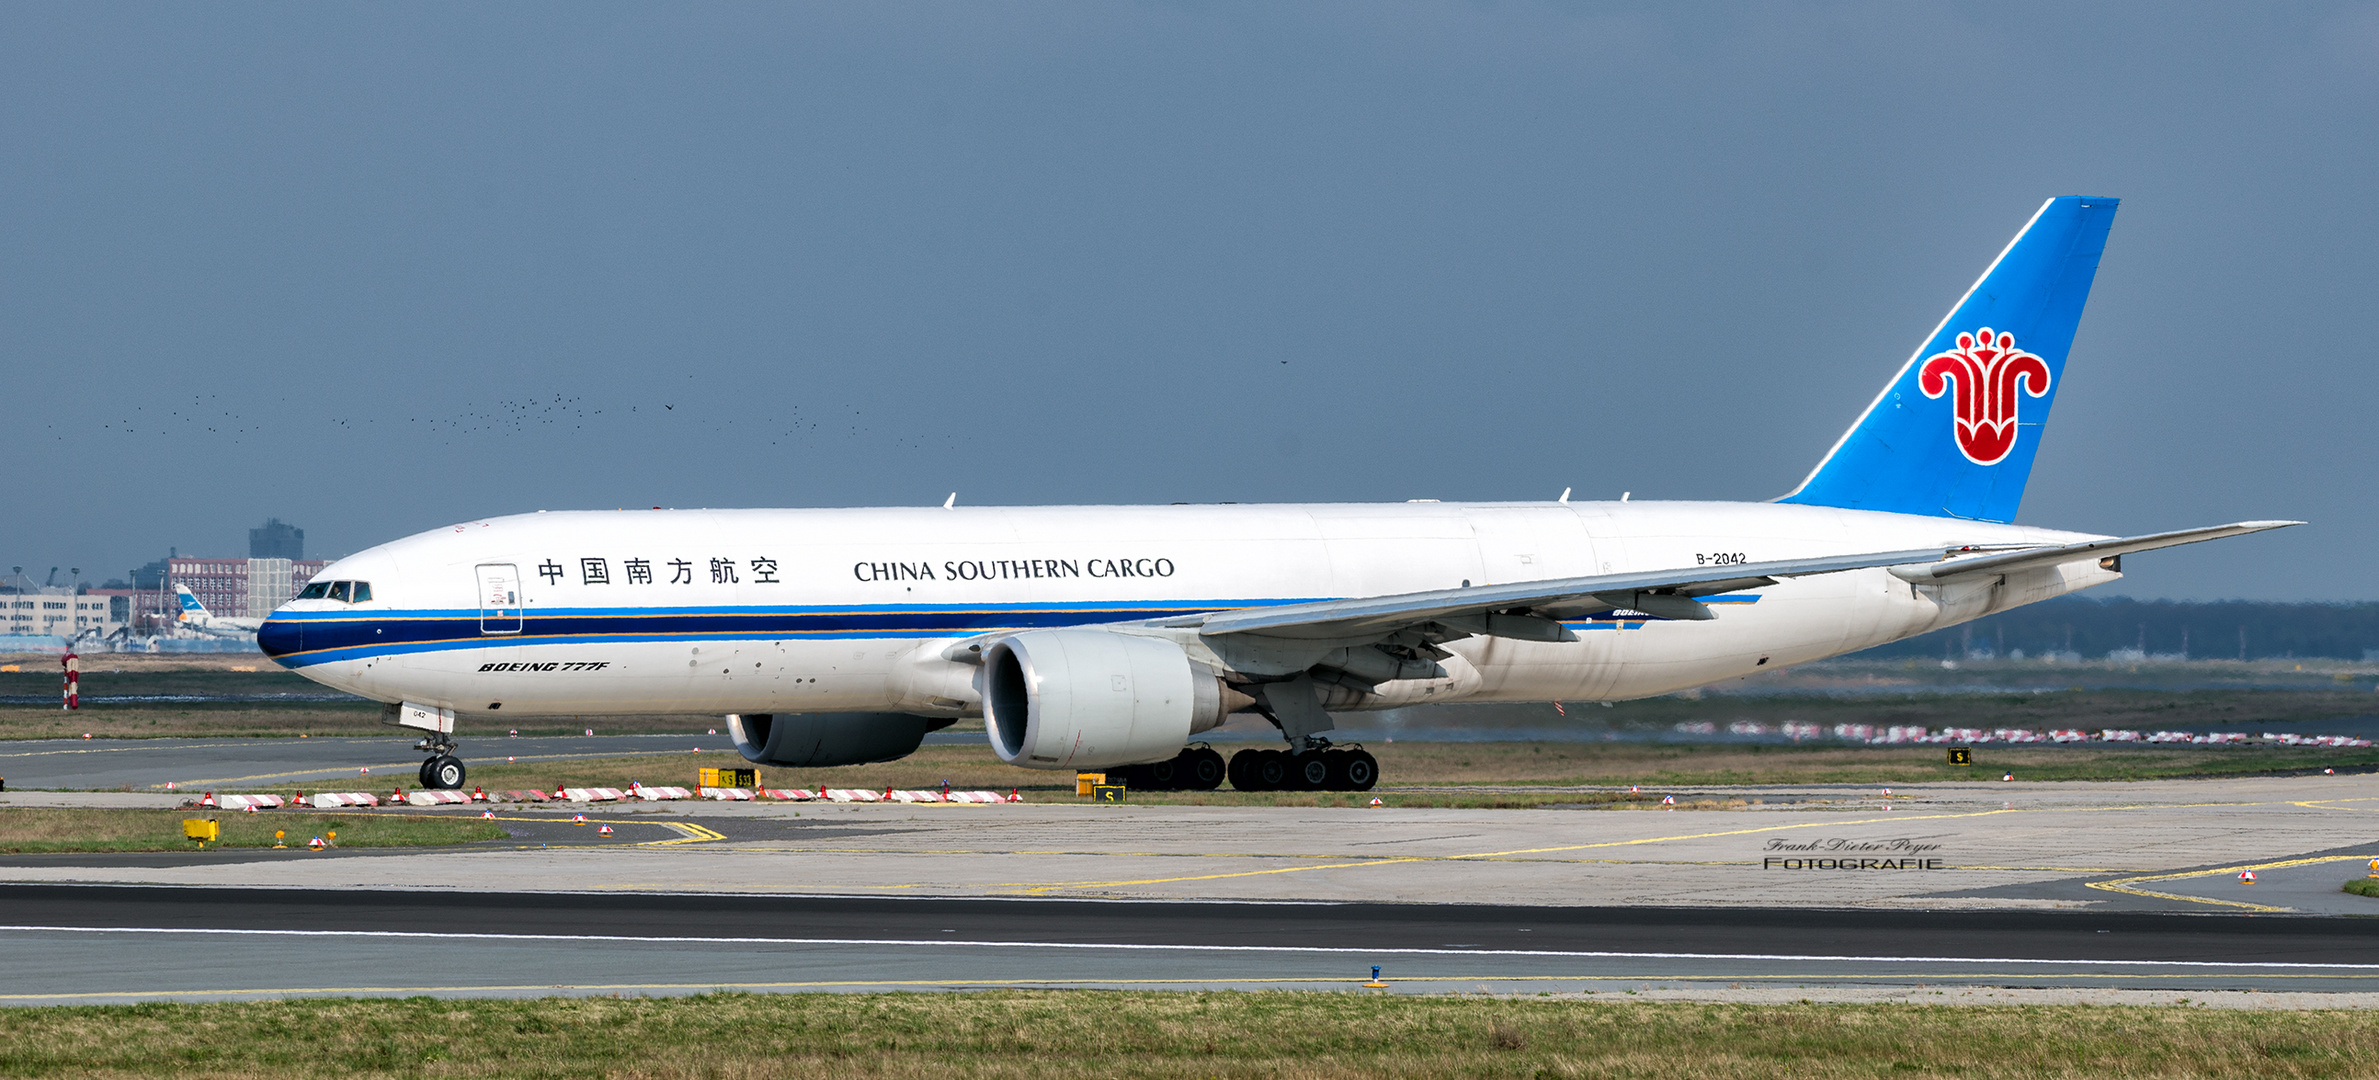 Boeing 777f China Southern Cargo